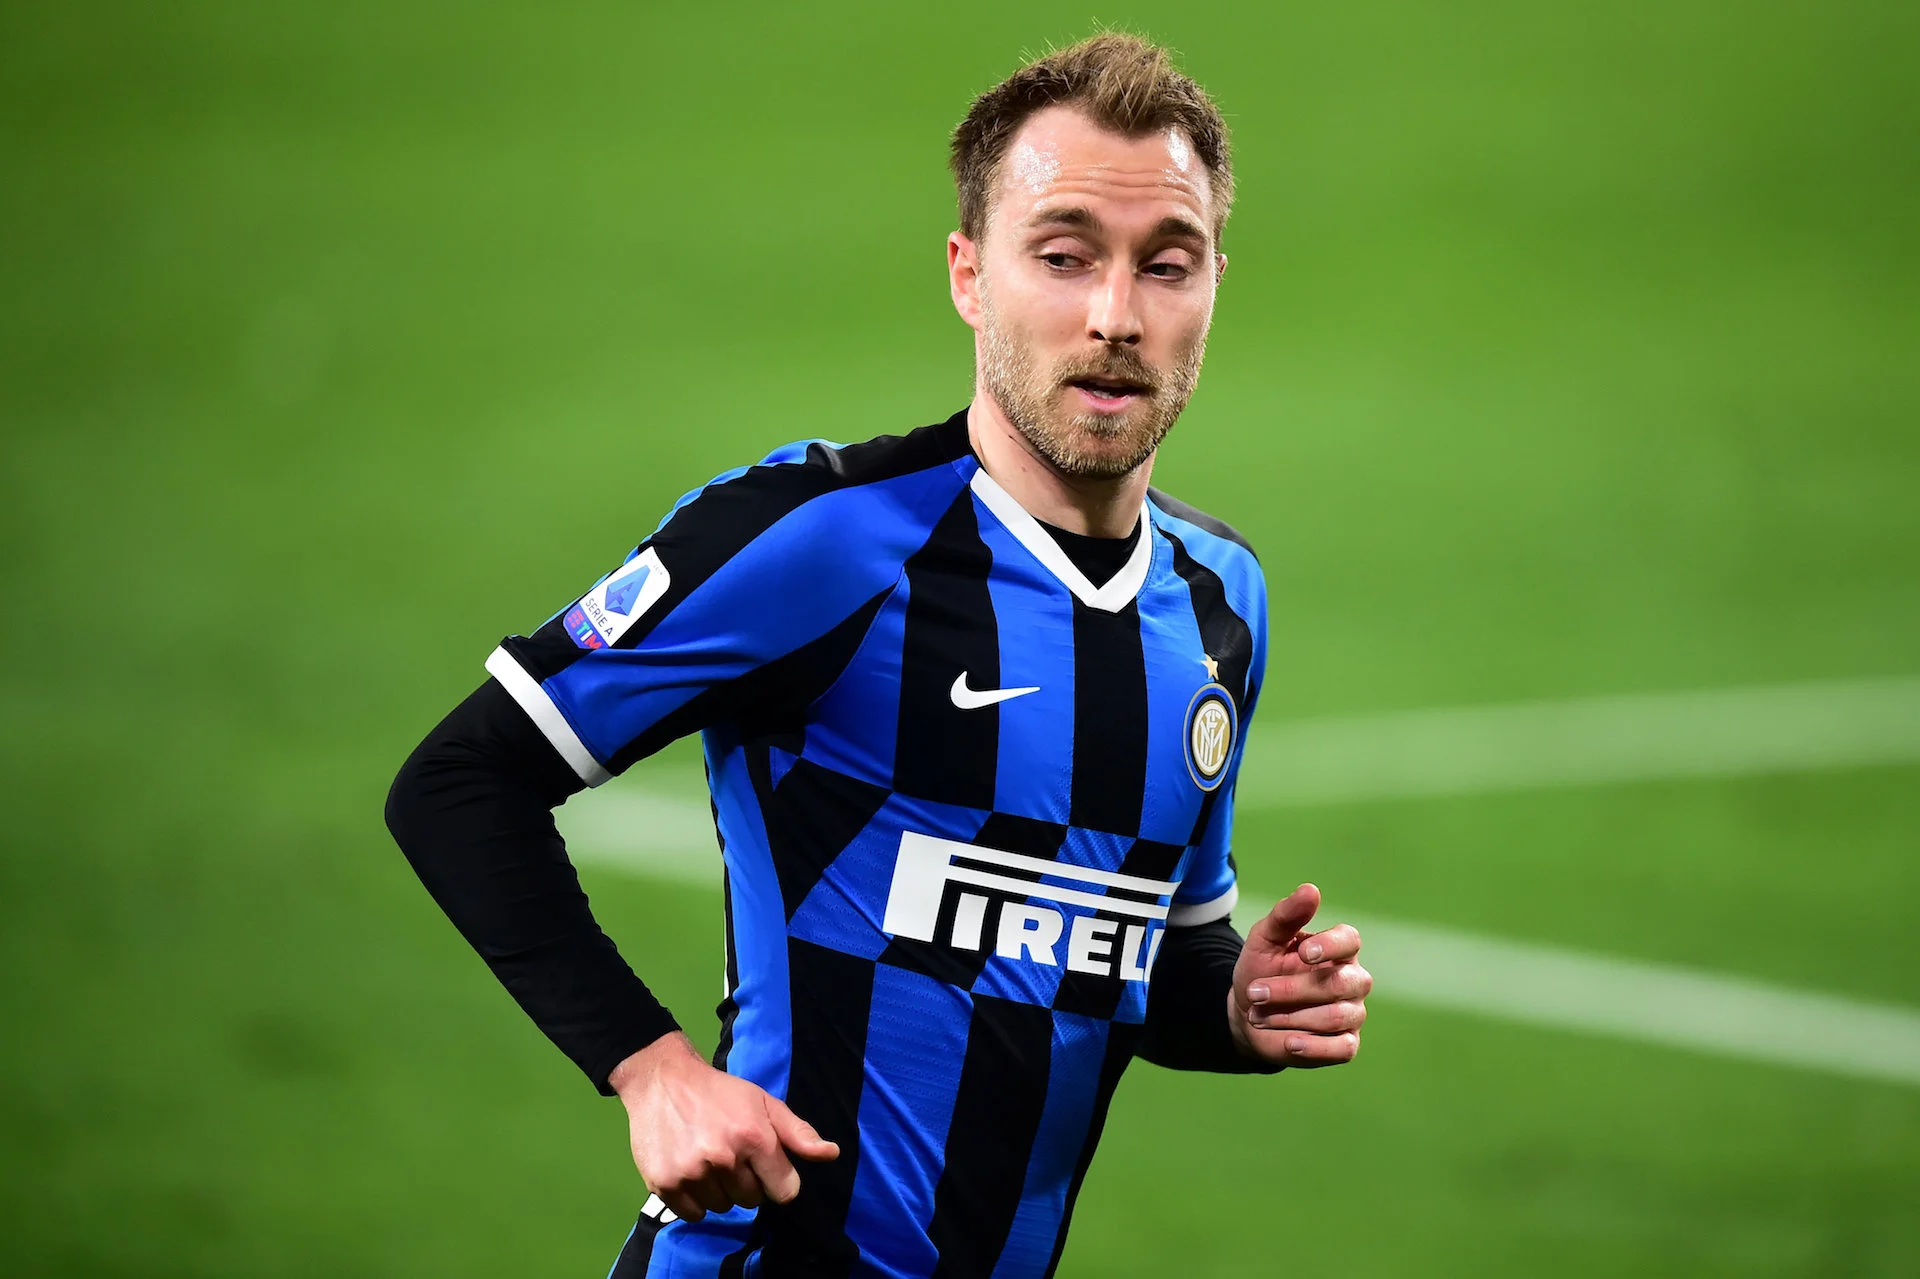 Inter Milan and Christian Eriksen have agreed to 'mutually end his contract before 2022'